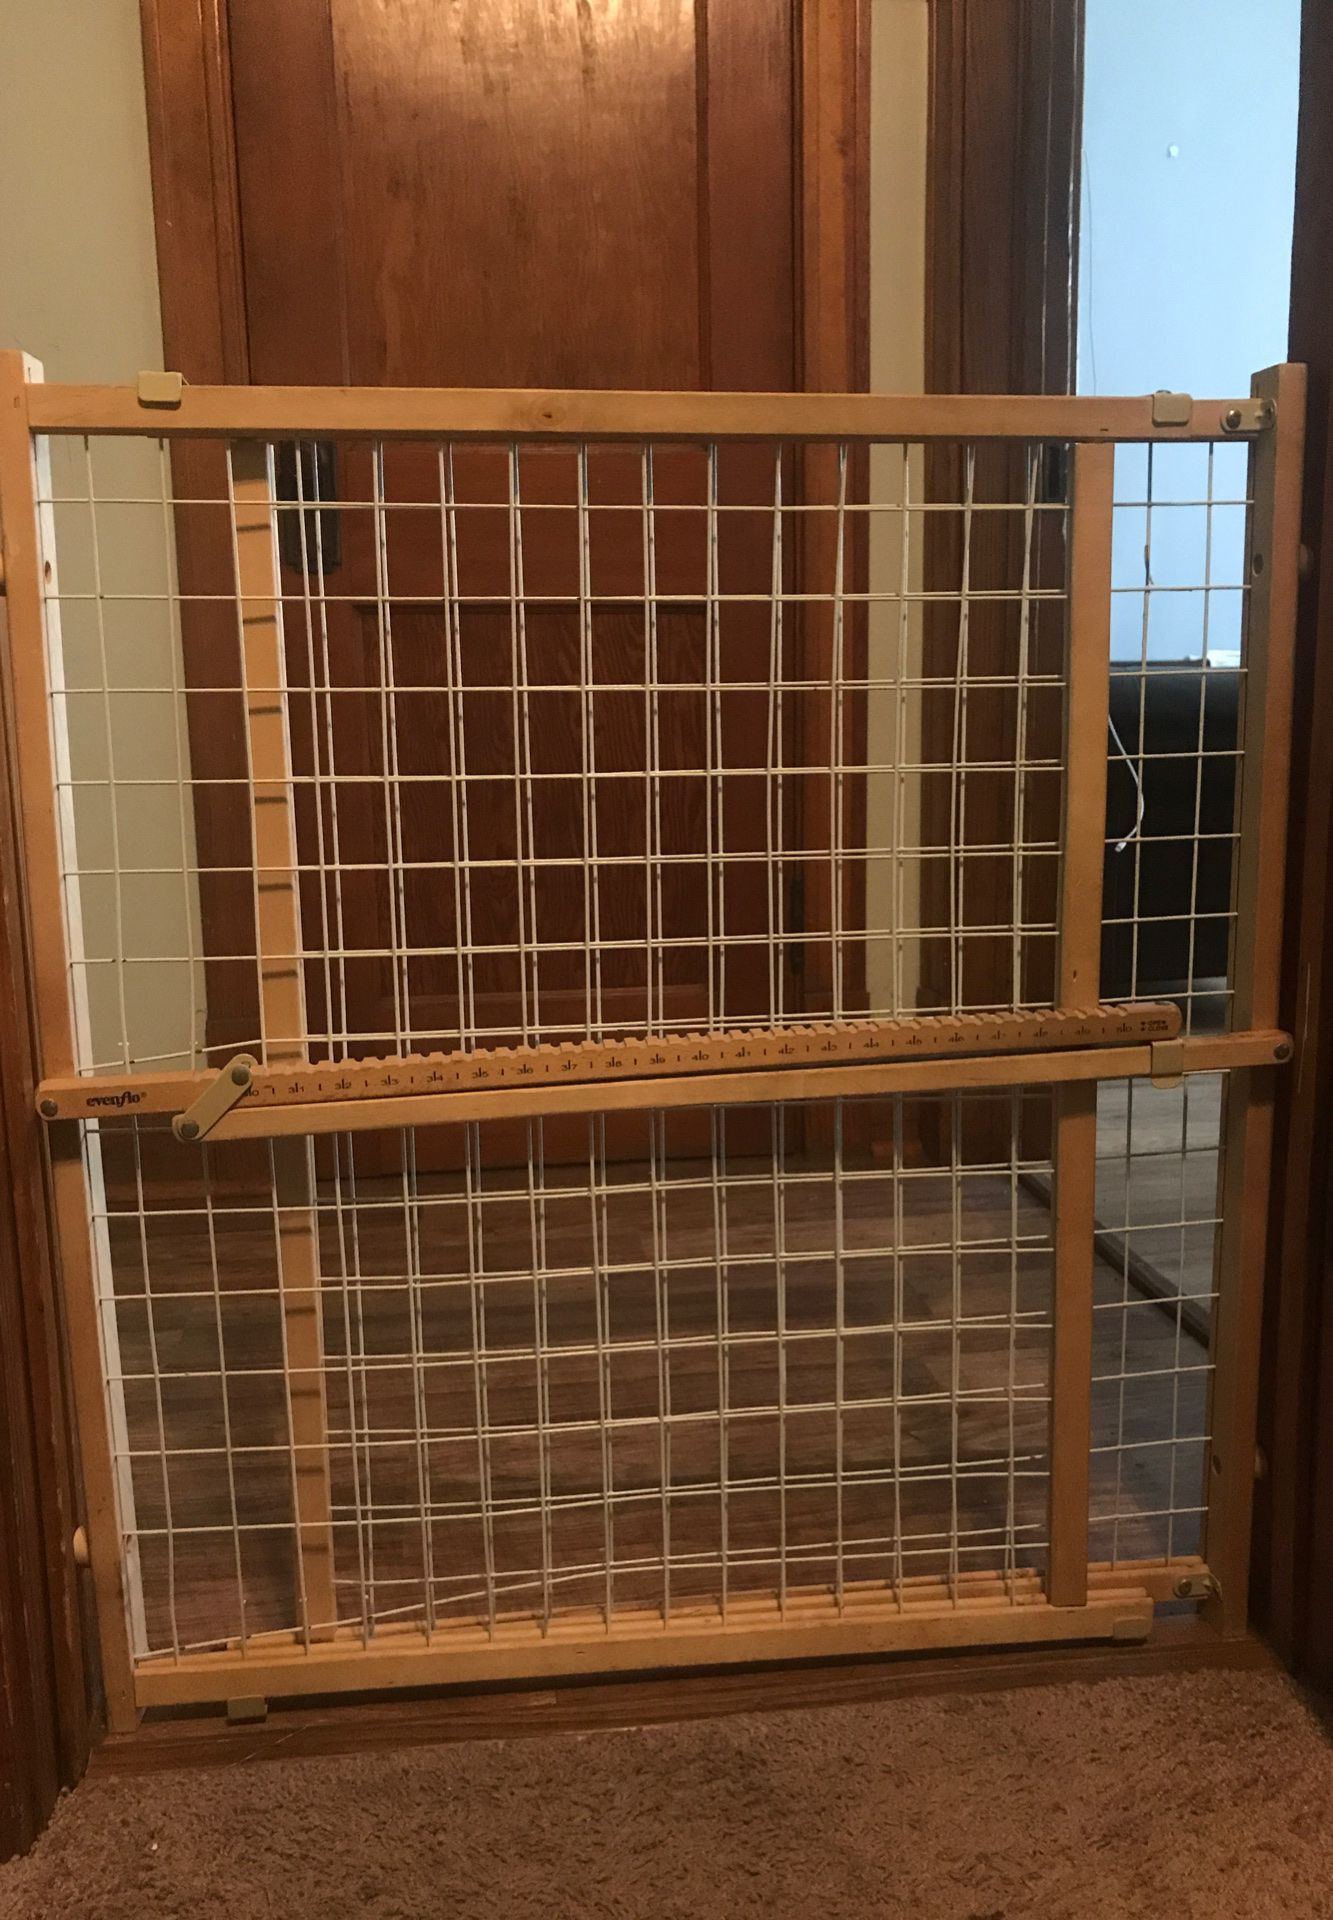 Indoor Child Safety Gate by Evenflow for kids, pets, dogs. Wood Frame